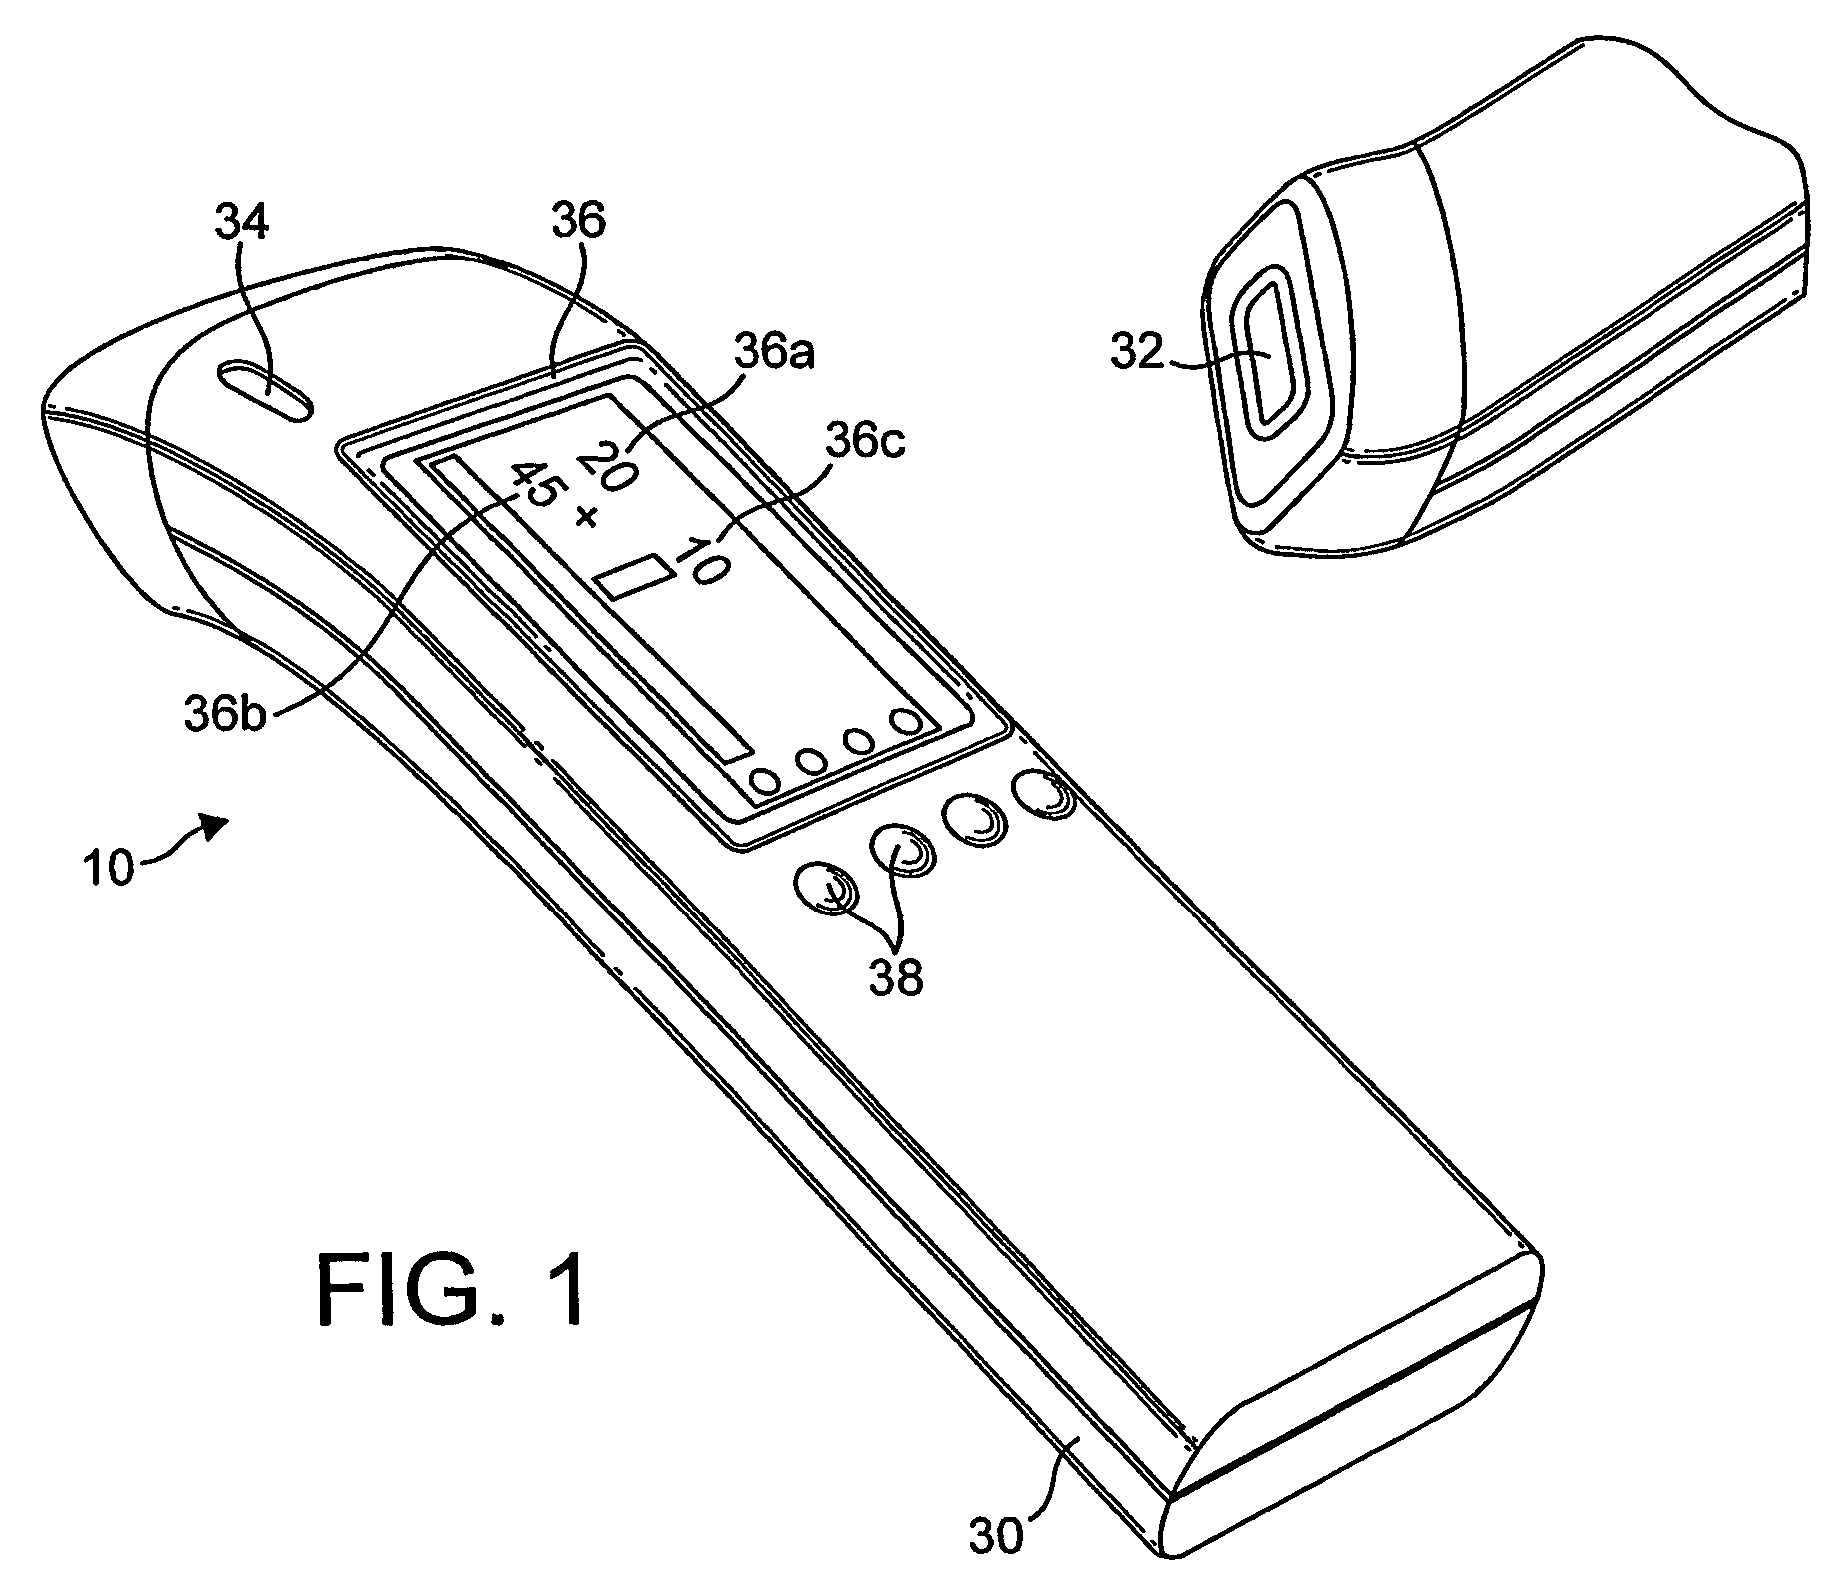 Treatment apparatus for applying electrical impulses to the body of a patient